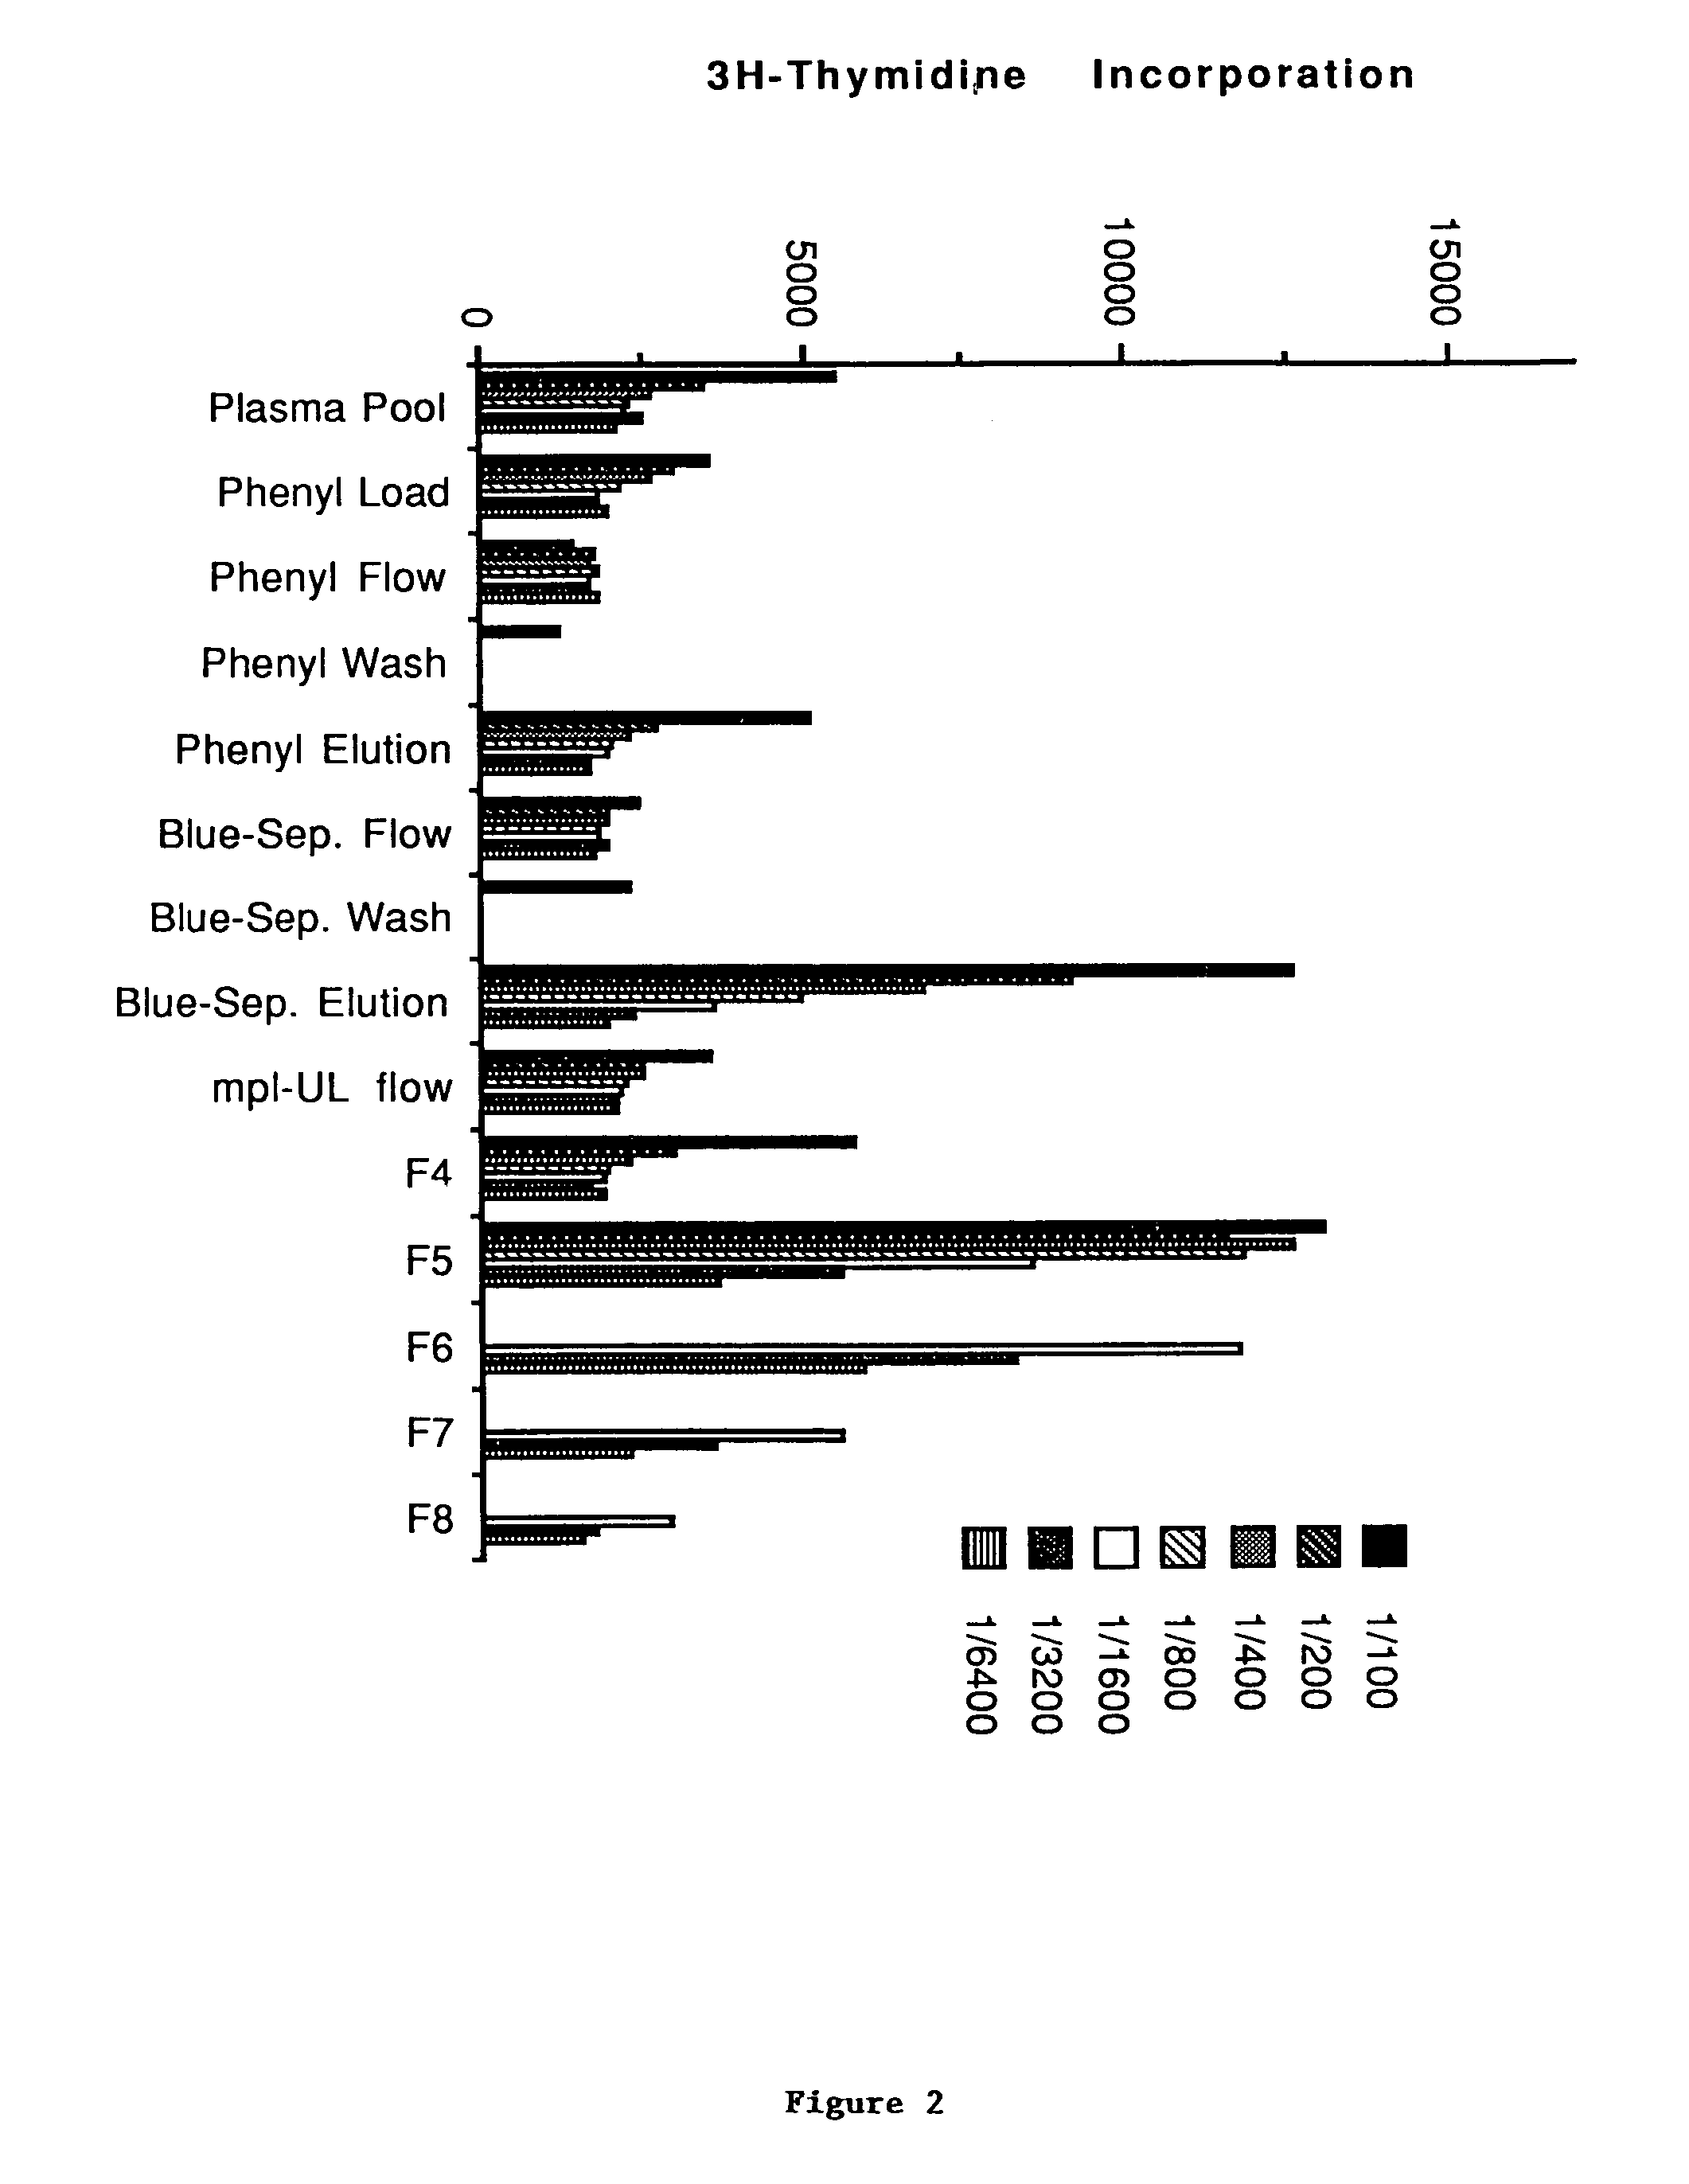 Nucleic acids encoding mpl ligand (thrombopoietin) and fragments thereof